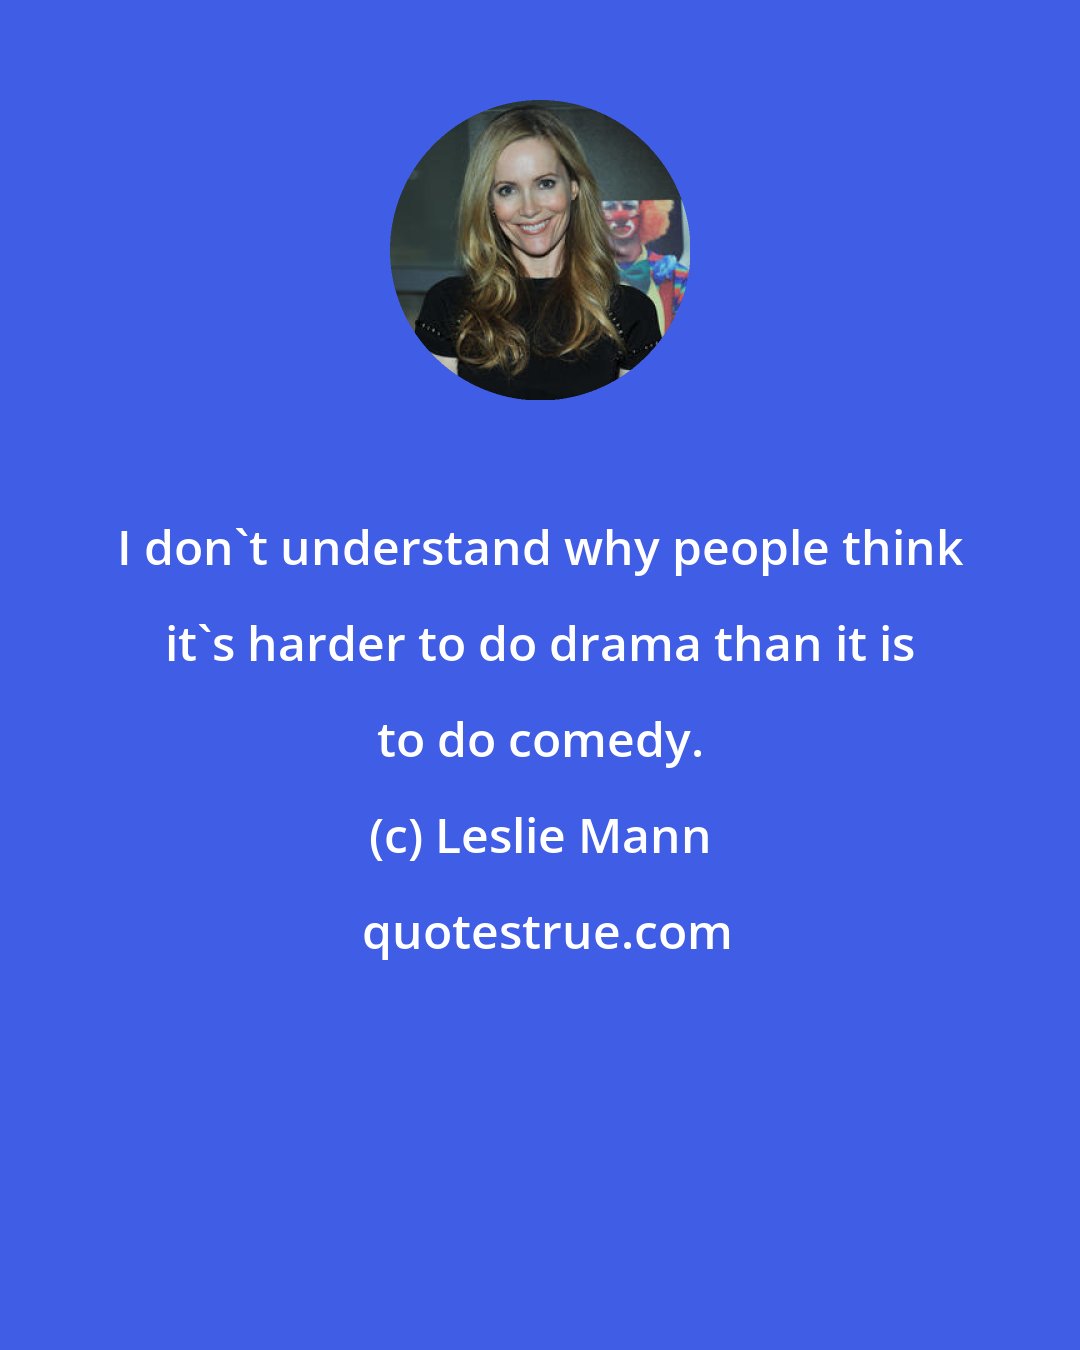 Leslie Mann: I don't understand why people think it's harder to do drama than it is to do comedy.